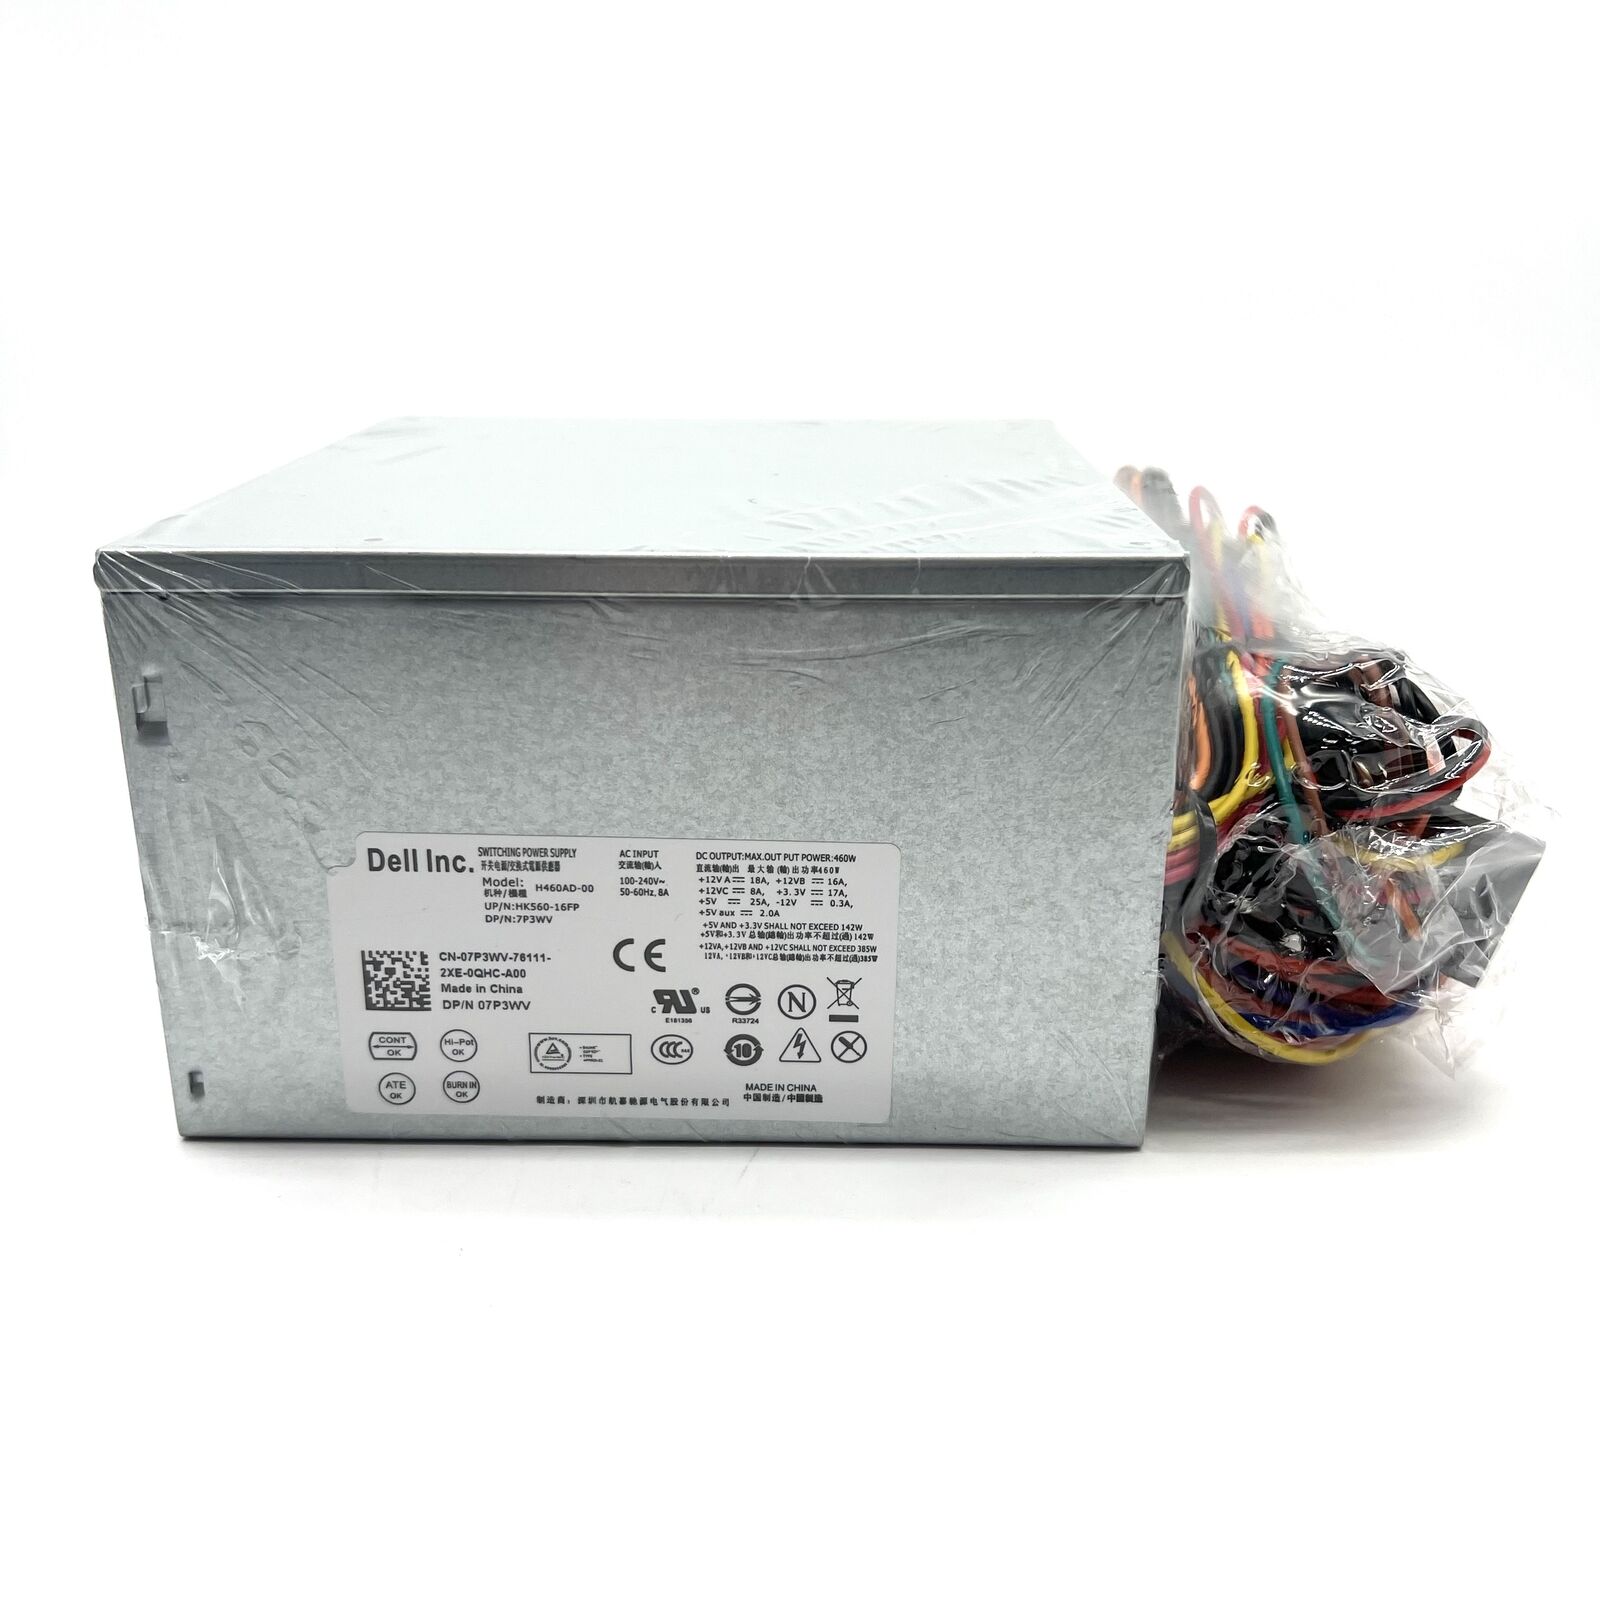 New 460W PSU Power Supply For DELL XPS 8910 8920 8300 8900 R5 D460AM-03